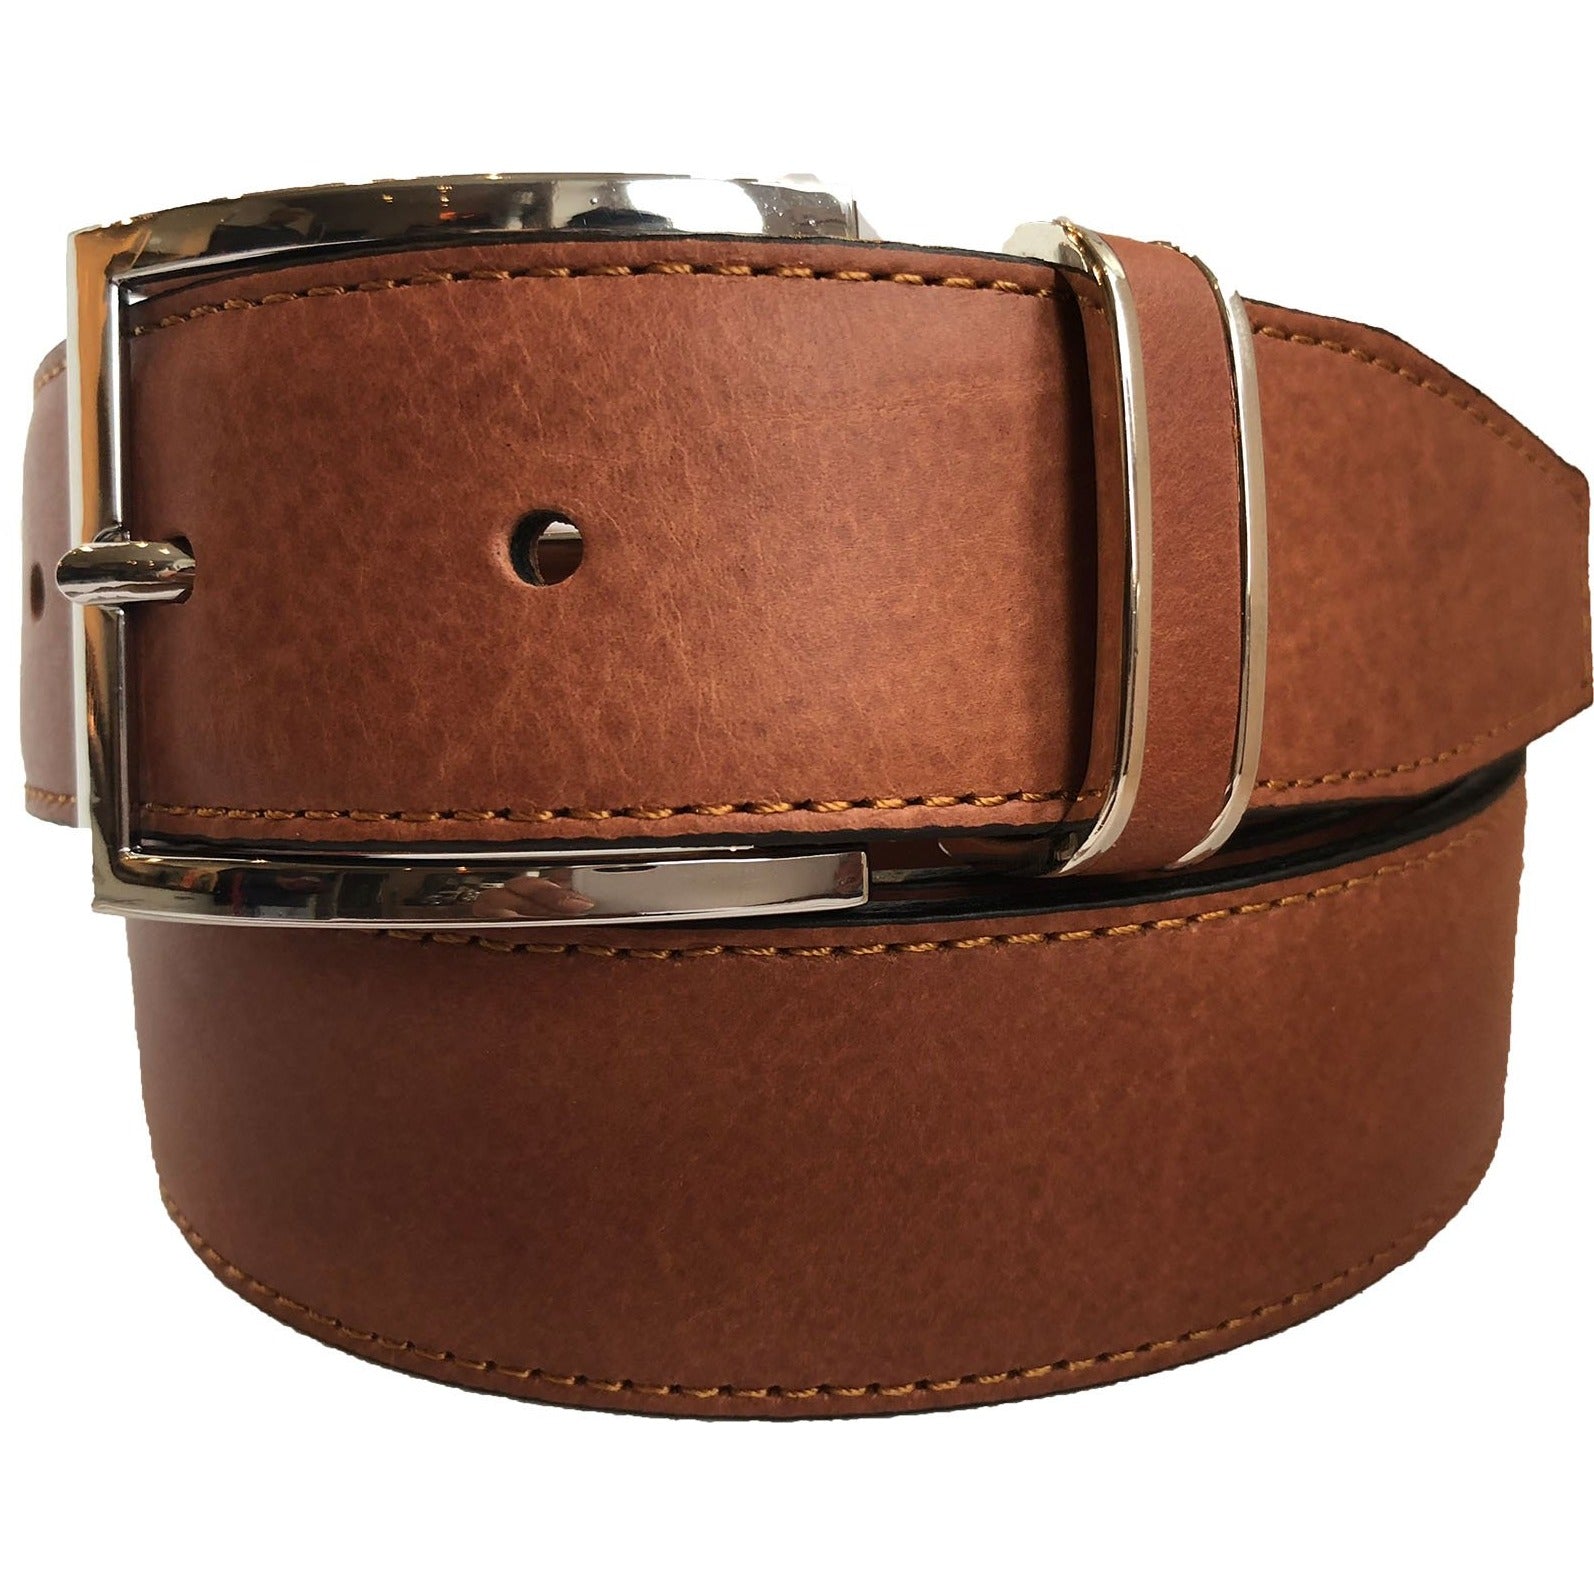 TAN CALF LEATHER METAL ACCENTED LOOP 35MM LEATHER BELT